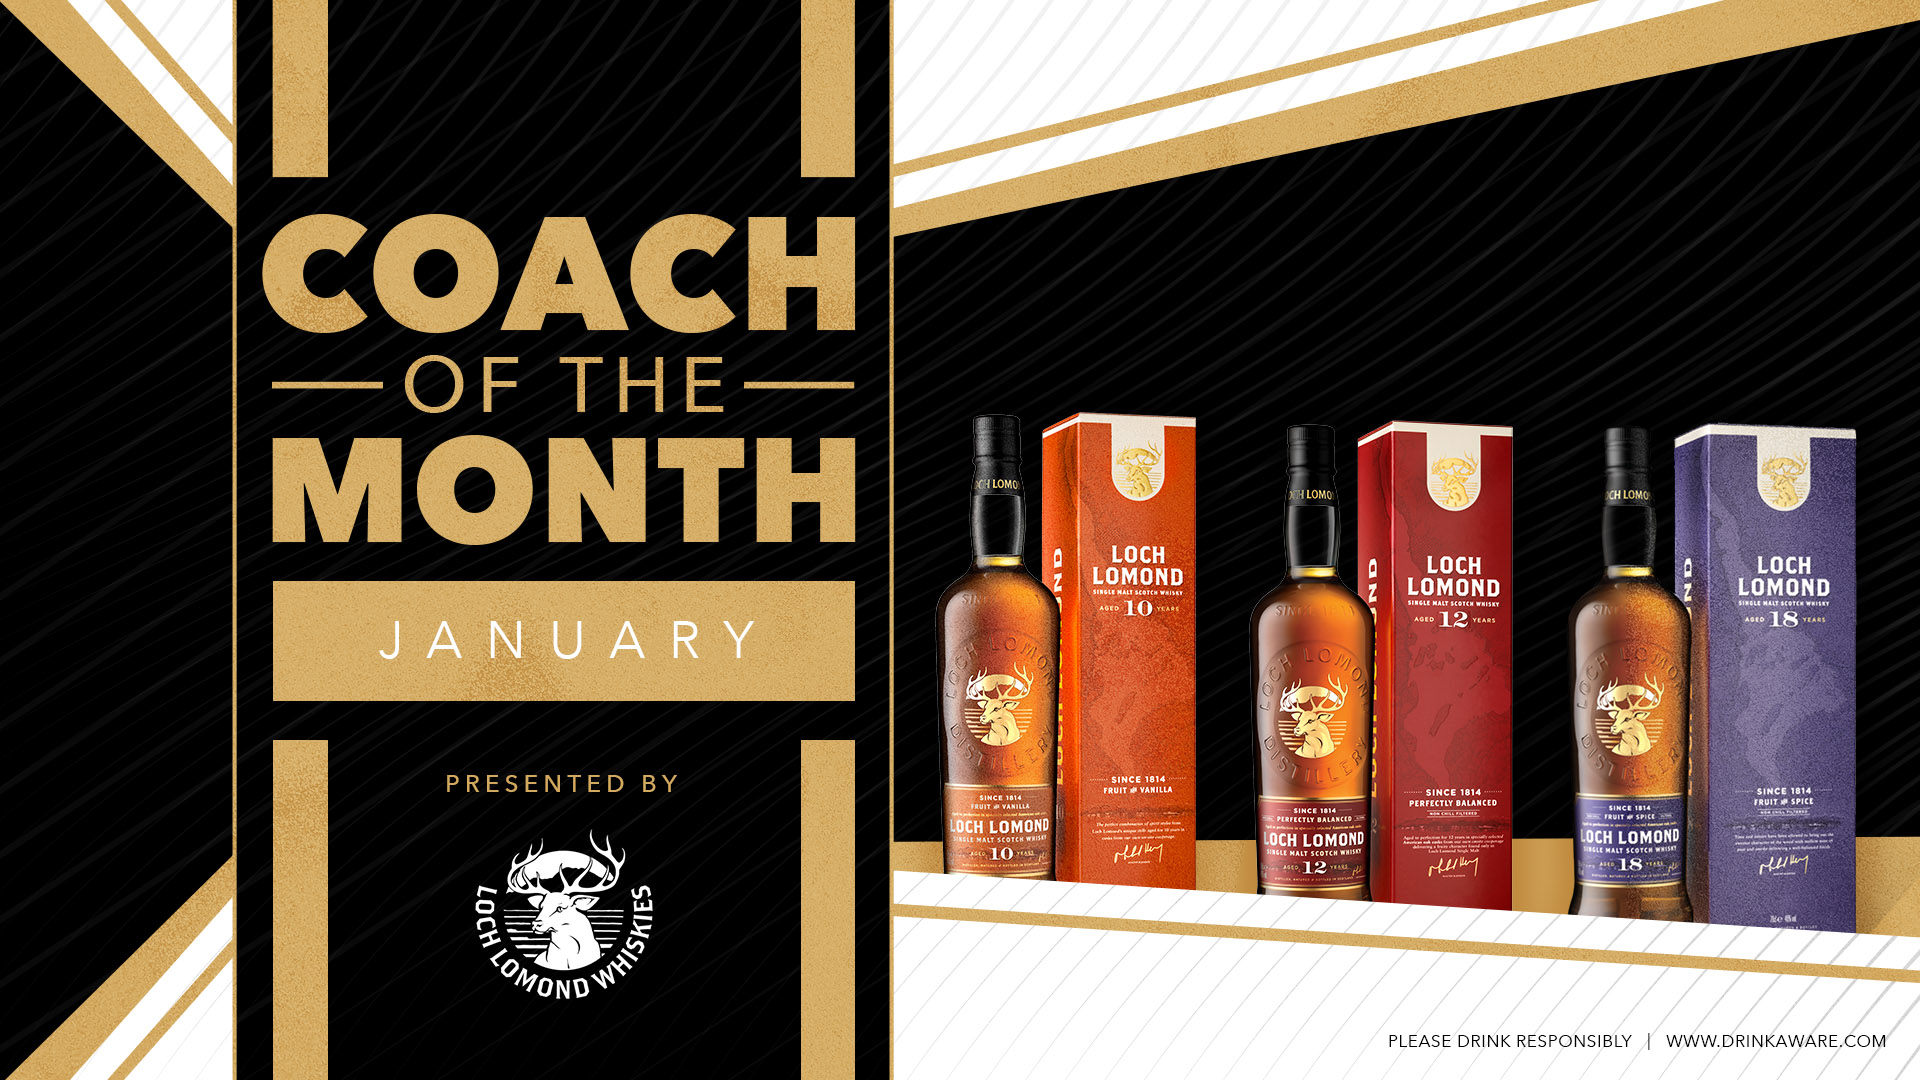 Loch Lomond Whiskies kicks off PRO14 Rugby Coach Of The Month